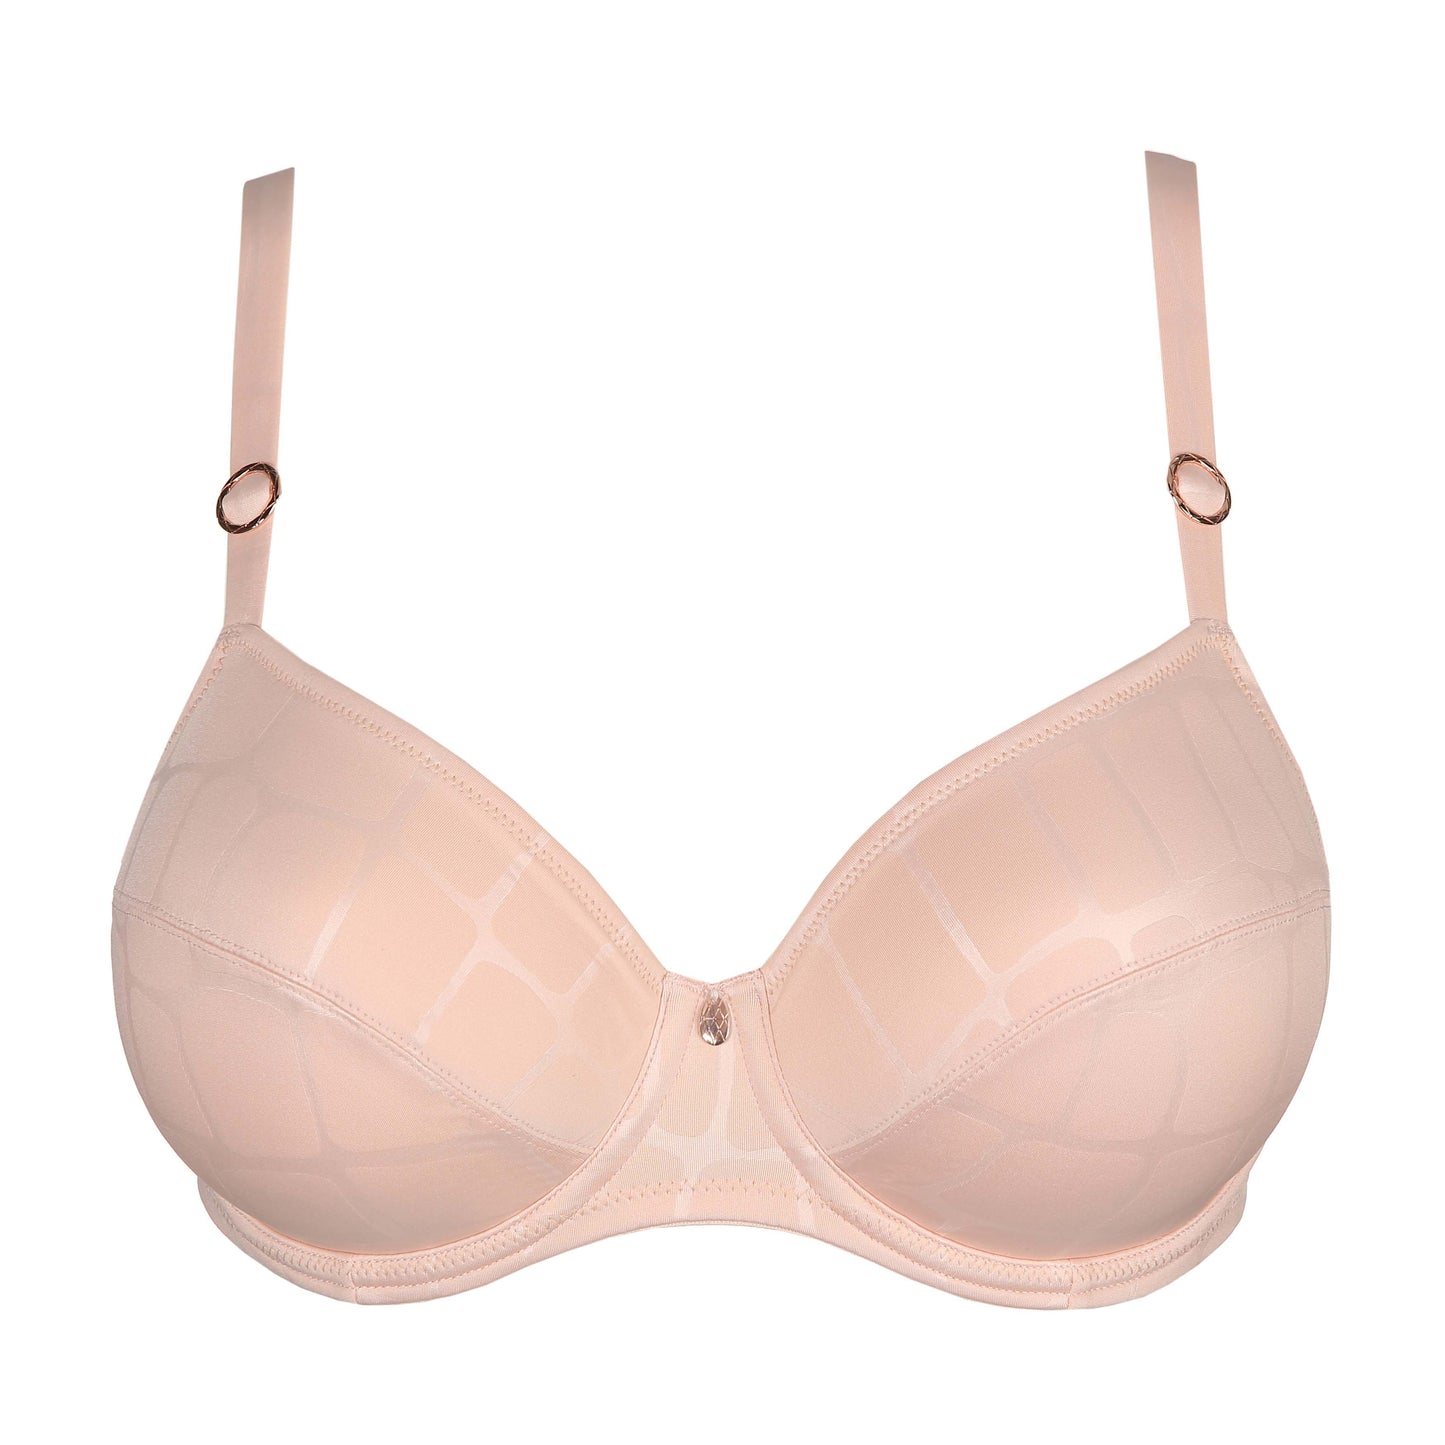 Marie Jo Yoshua volle cup bh silky tan